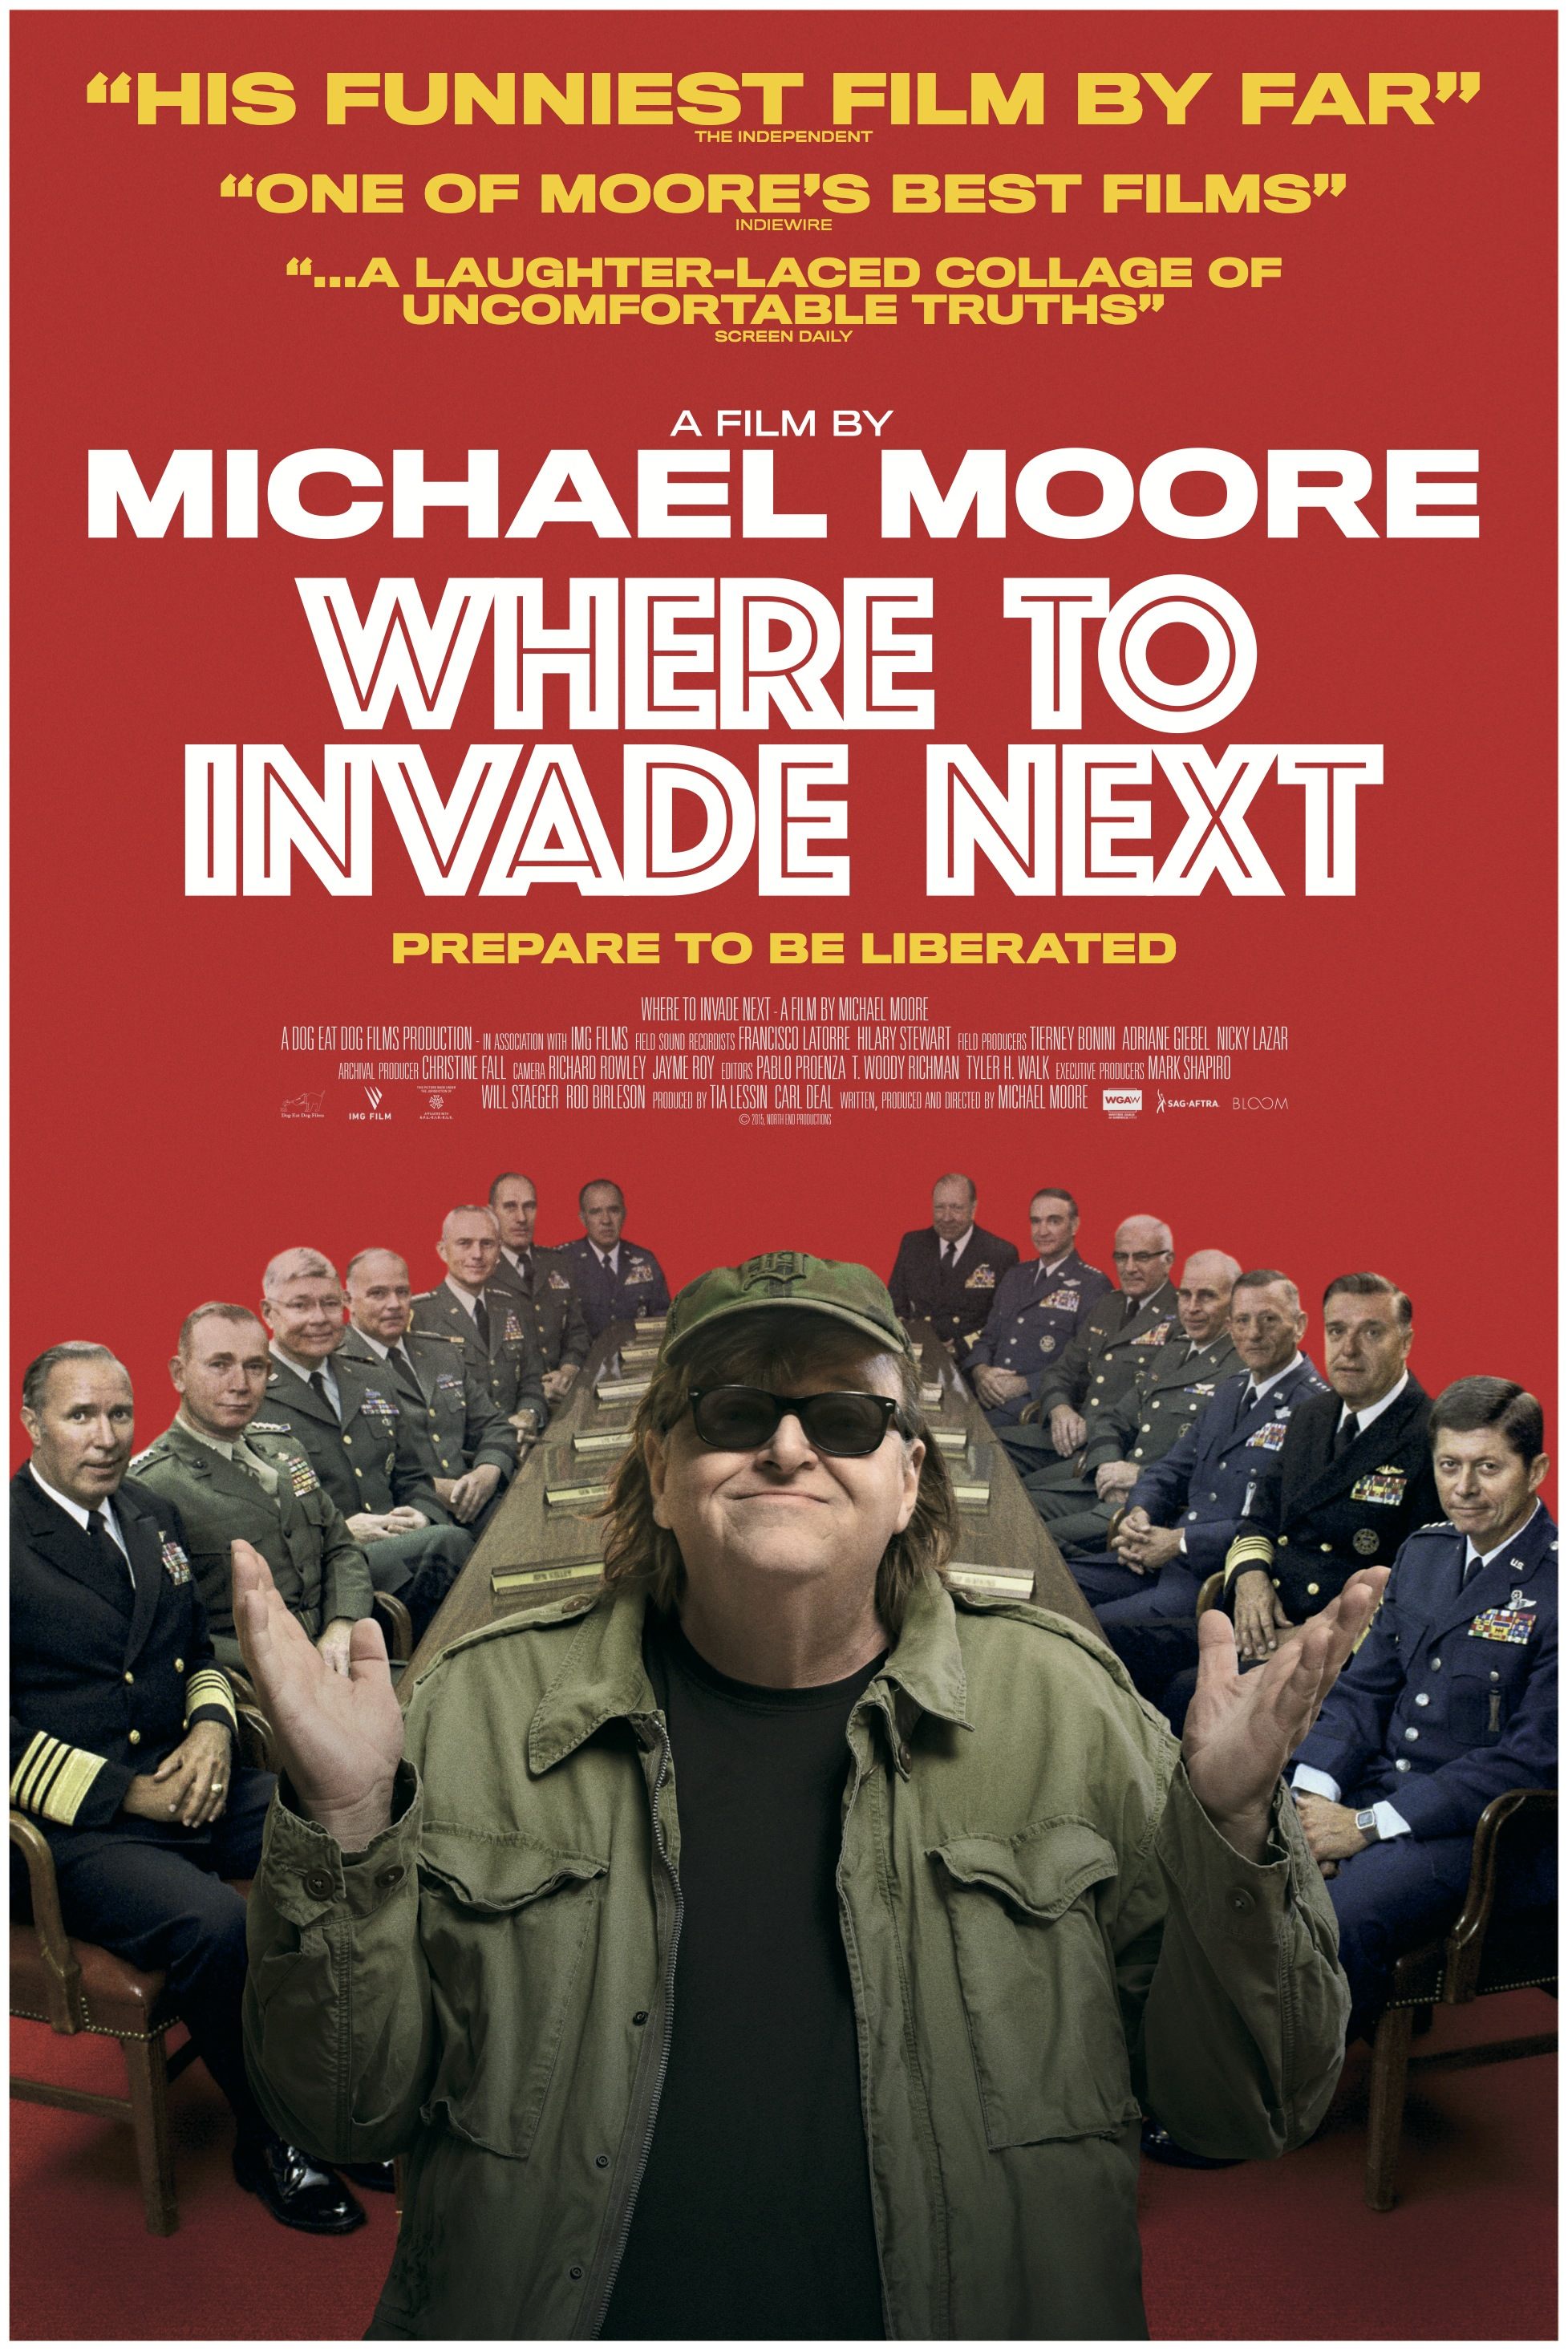 https://www.transcend.org/tms/wp-content/uploads/2016/02/where-to-invade-next-michael-Moore2.jpg